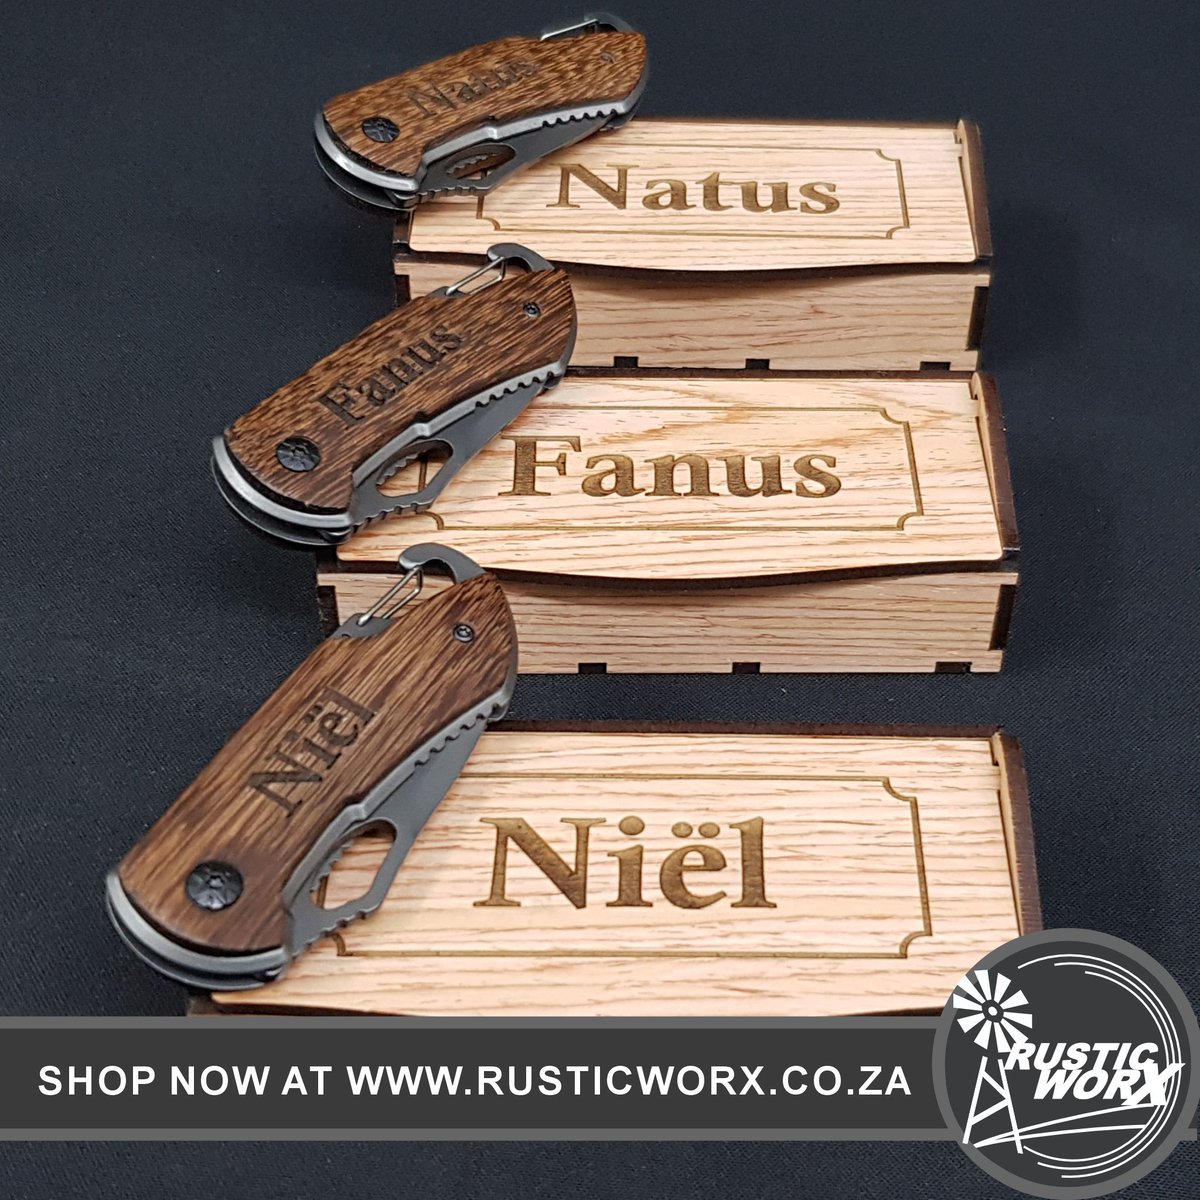 Elegance meets utility in our personalized pocket knives. 
A gift suitable for any occasion

Contact us on sales@rusticworx.co.za or see our website rusticworx.co.za to order yours now!

#EngravedKnives #CustomGifts #CorporateGifts SupportLocal  #RusticWorx